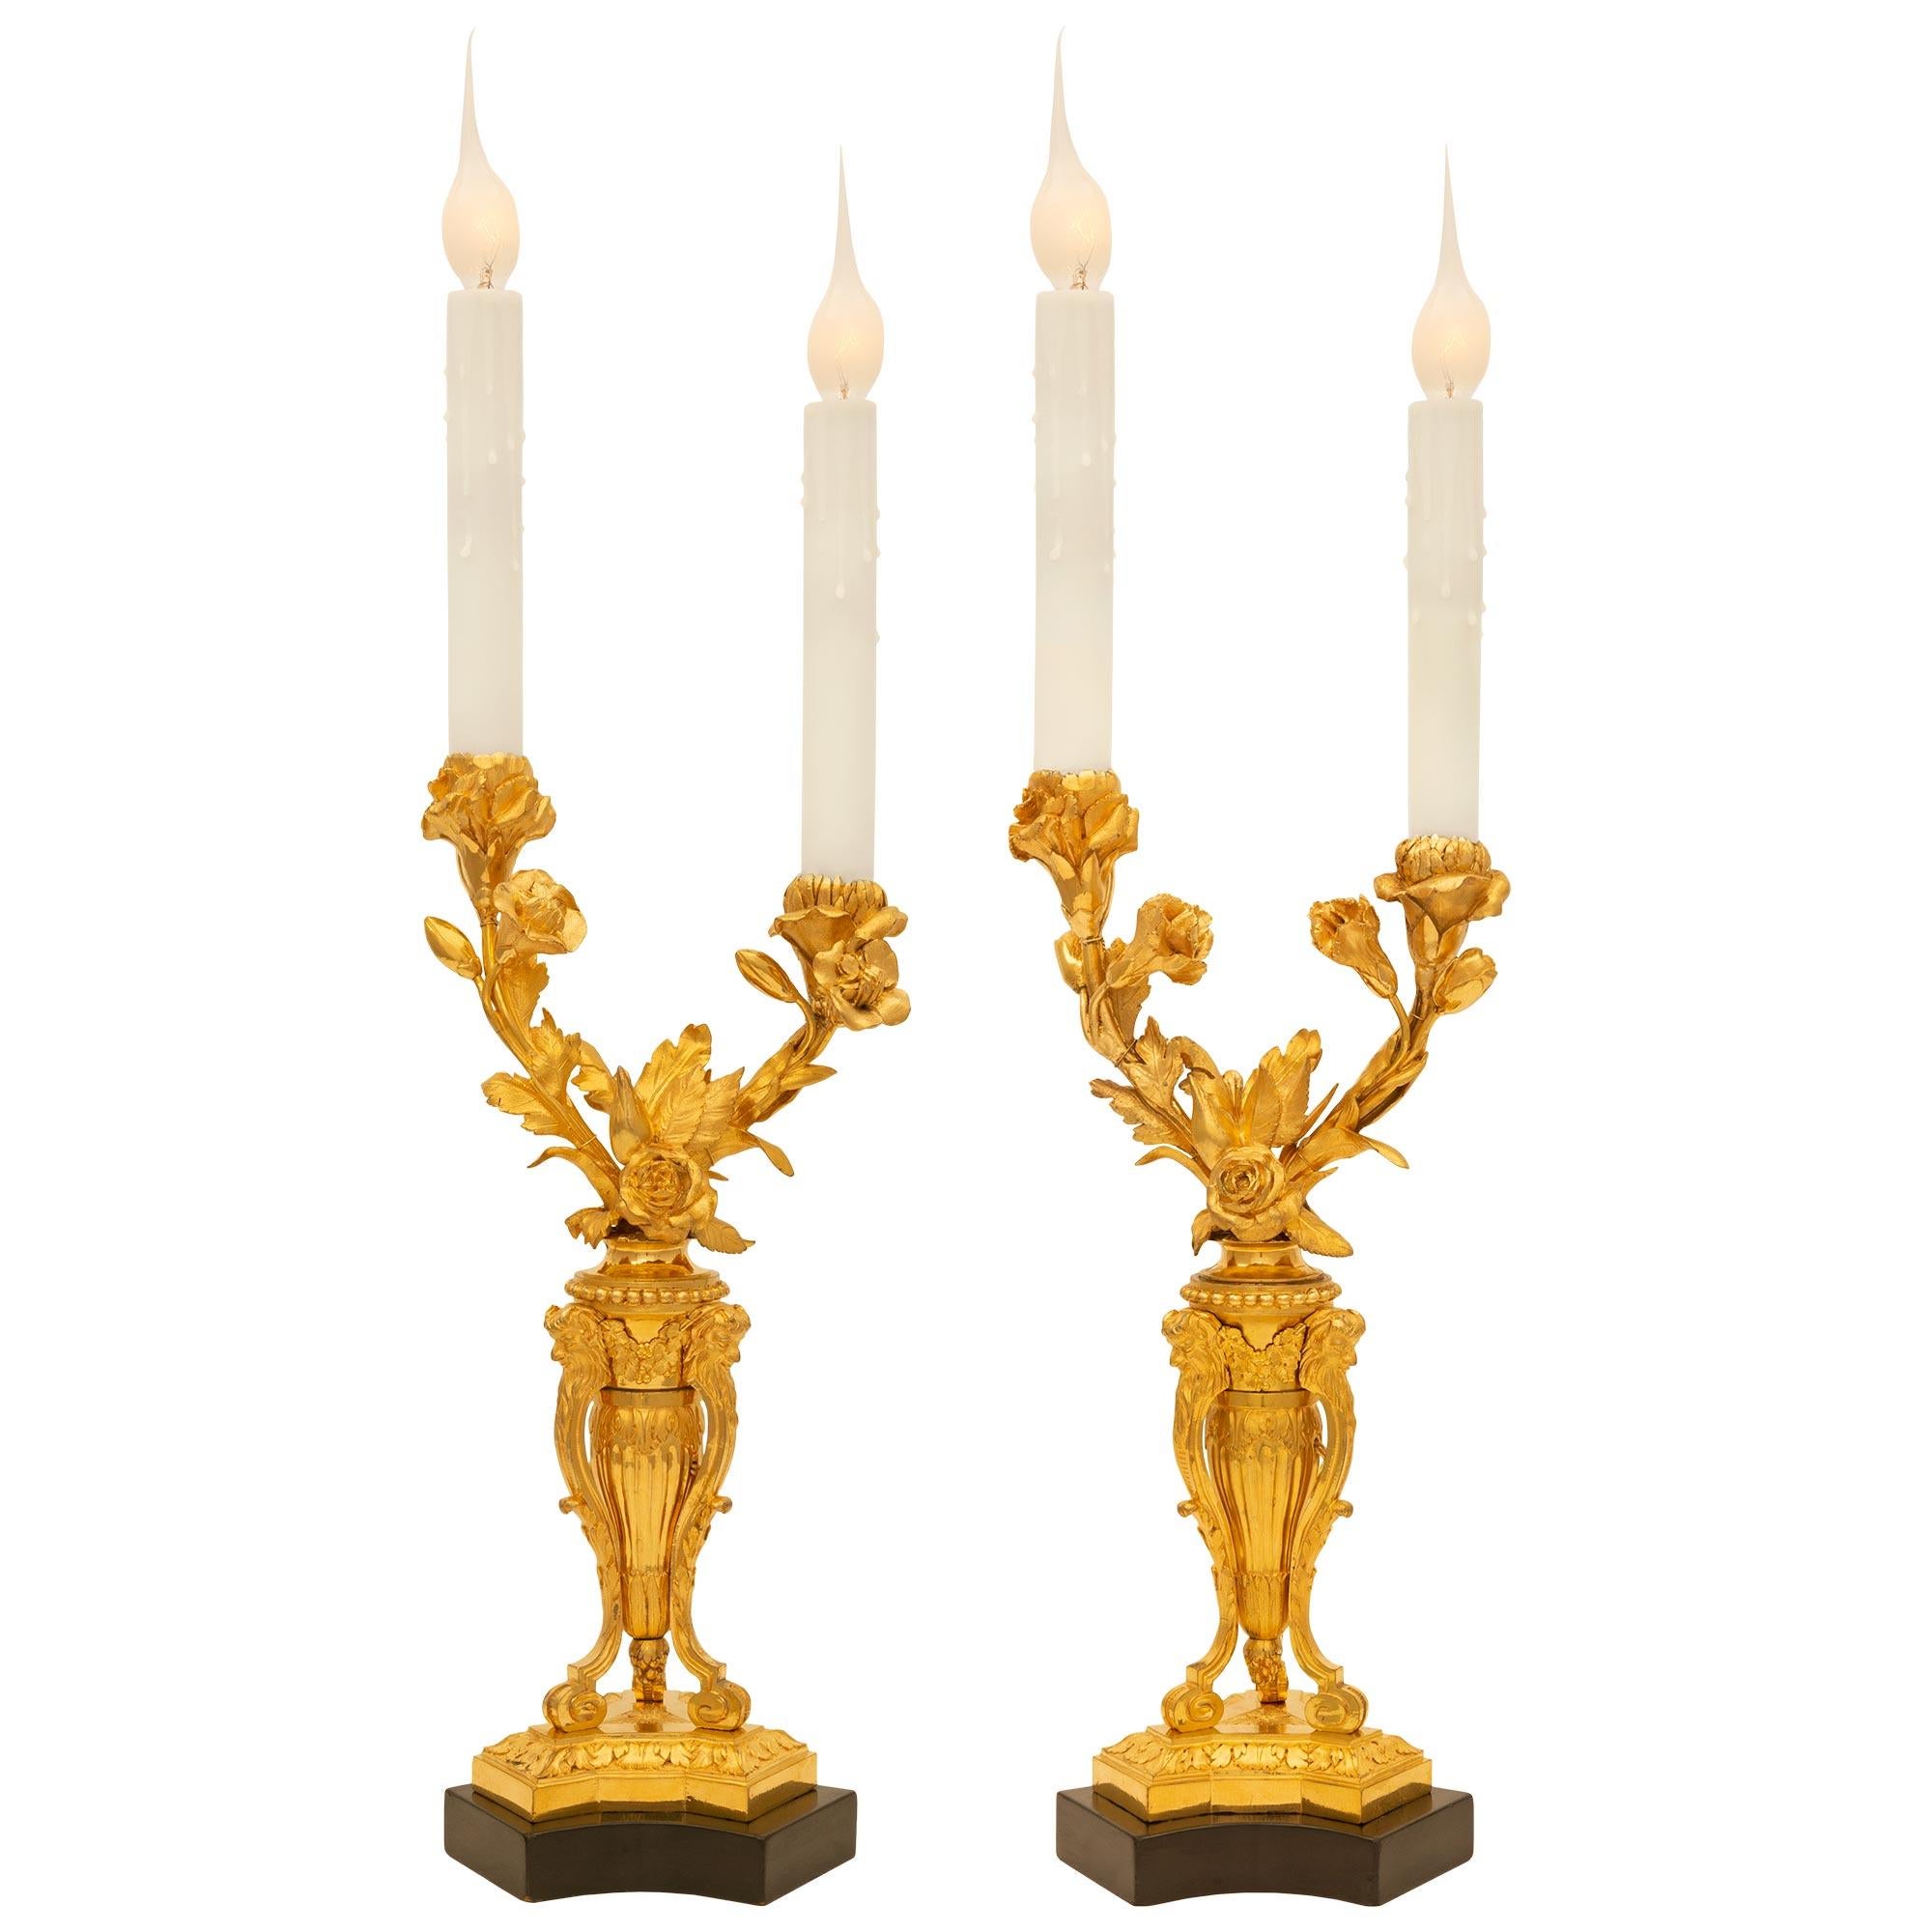 A striking pair of French 19th century Louis XVI St. Ormolu and ebonized Fruitwood candelabra lamp. The two arm lamp is raised by a triangular ebonized Fruitwood base and fine mottled ormolu support with an elegant wrap around band. The superb